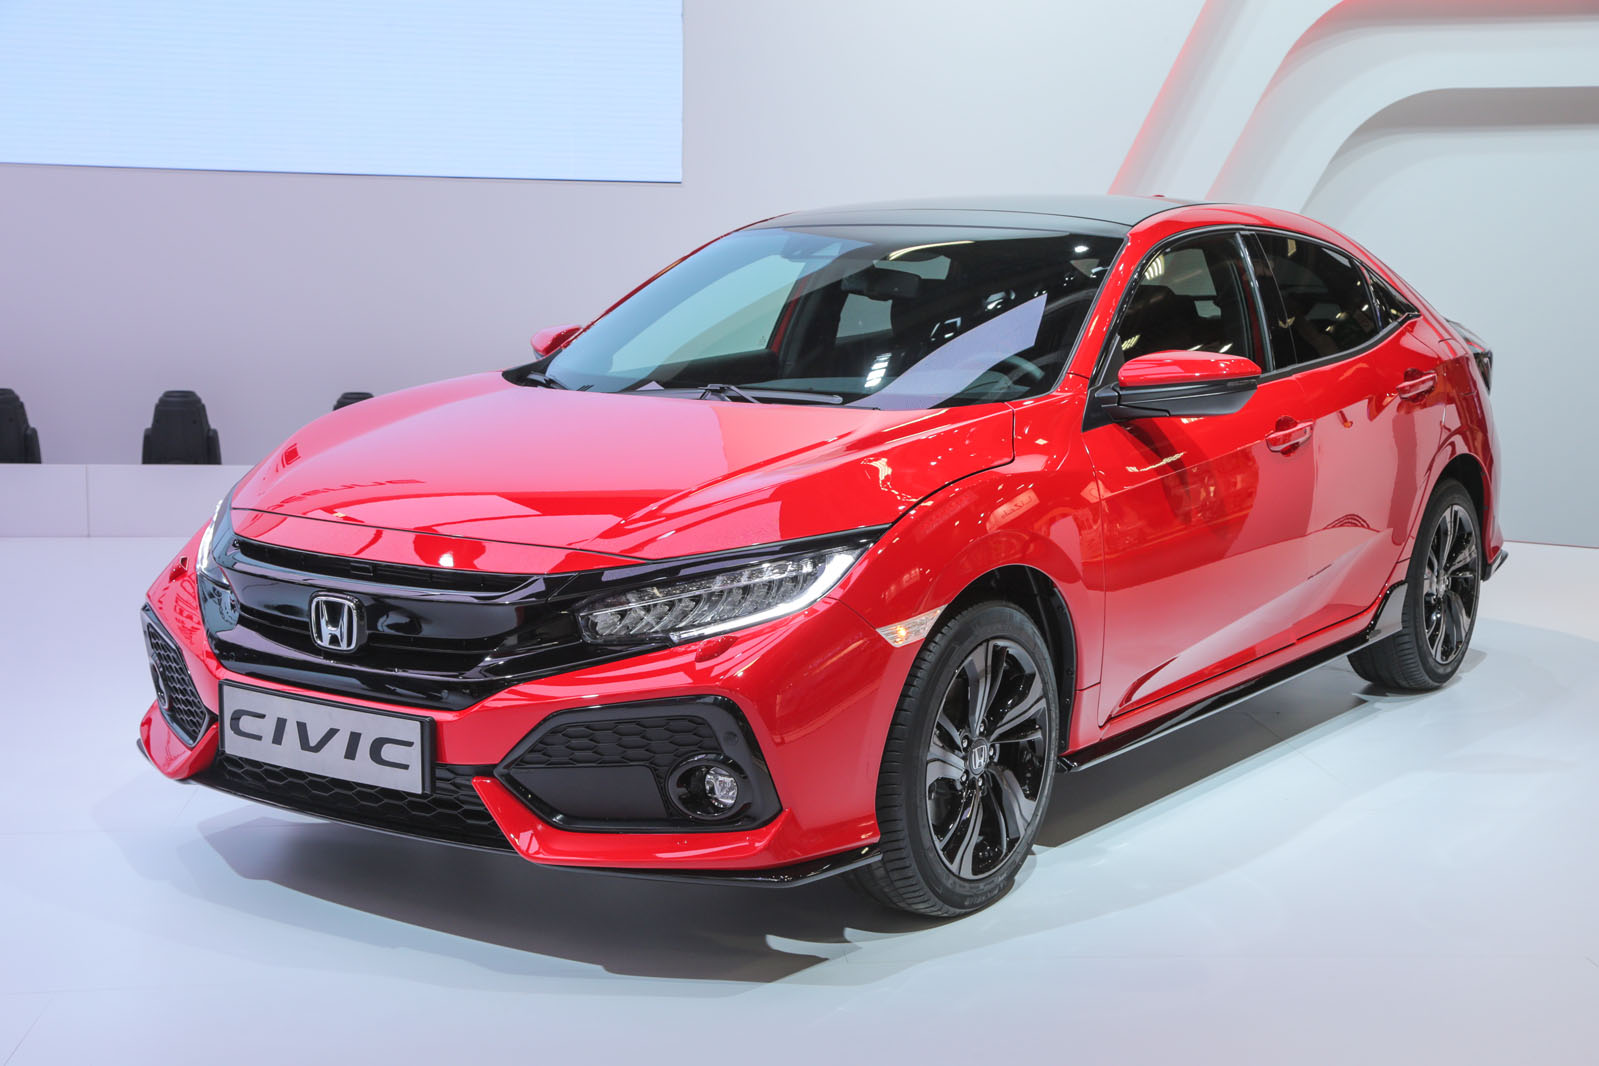 17 Honda Civic On Sale In March Priced From 18 235 Autocar